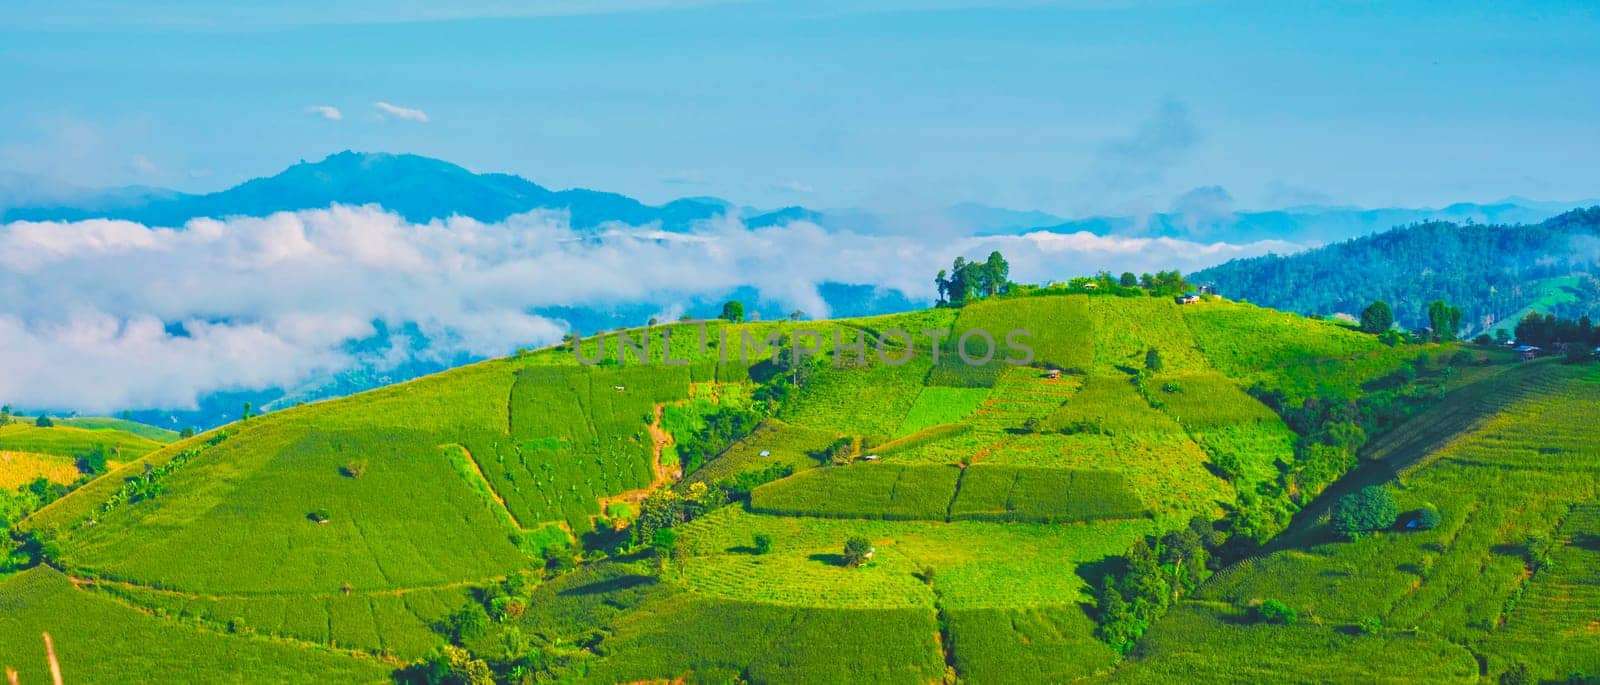 Terraced Rice Field in Chiangmai, Thailand, Pa Pong Piang rice terraces, green rice paddy fields during rain season with mist an fog in the mountains